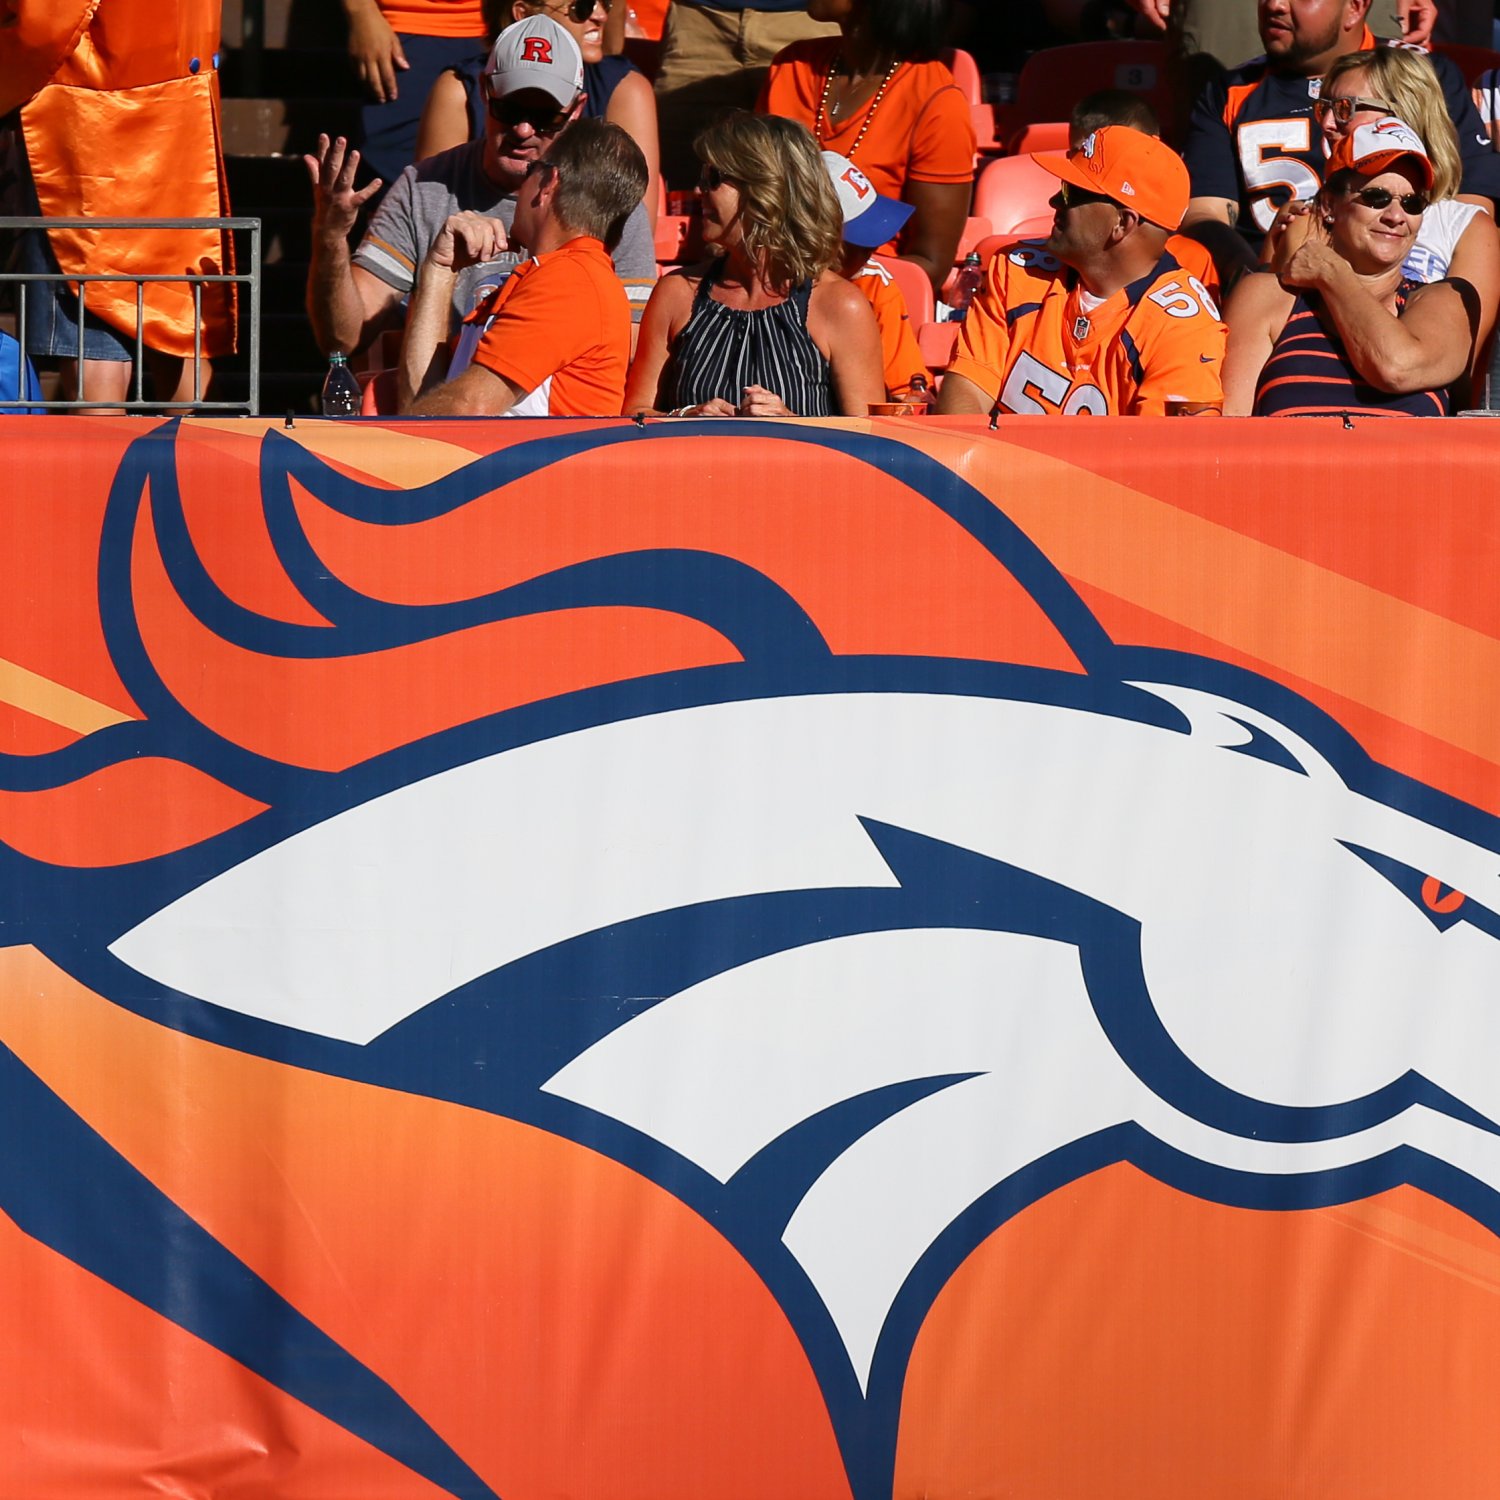 Fan Dies After Falling over Railing at Texans vs. Broncos